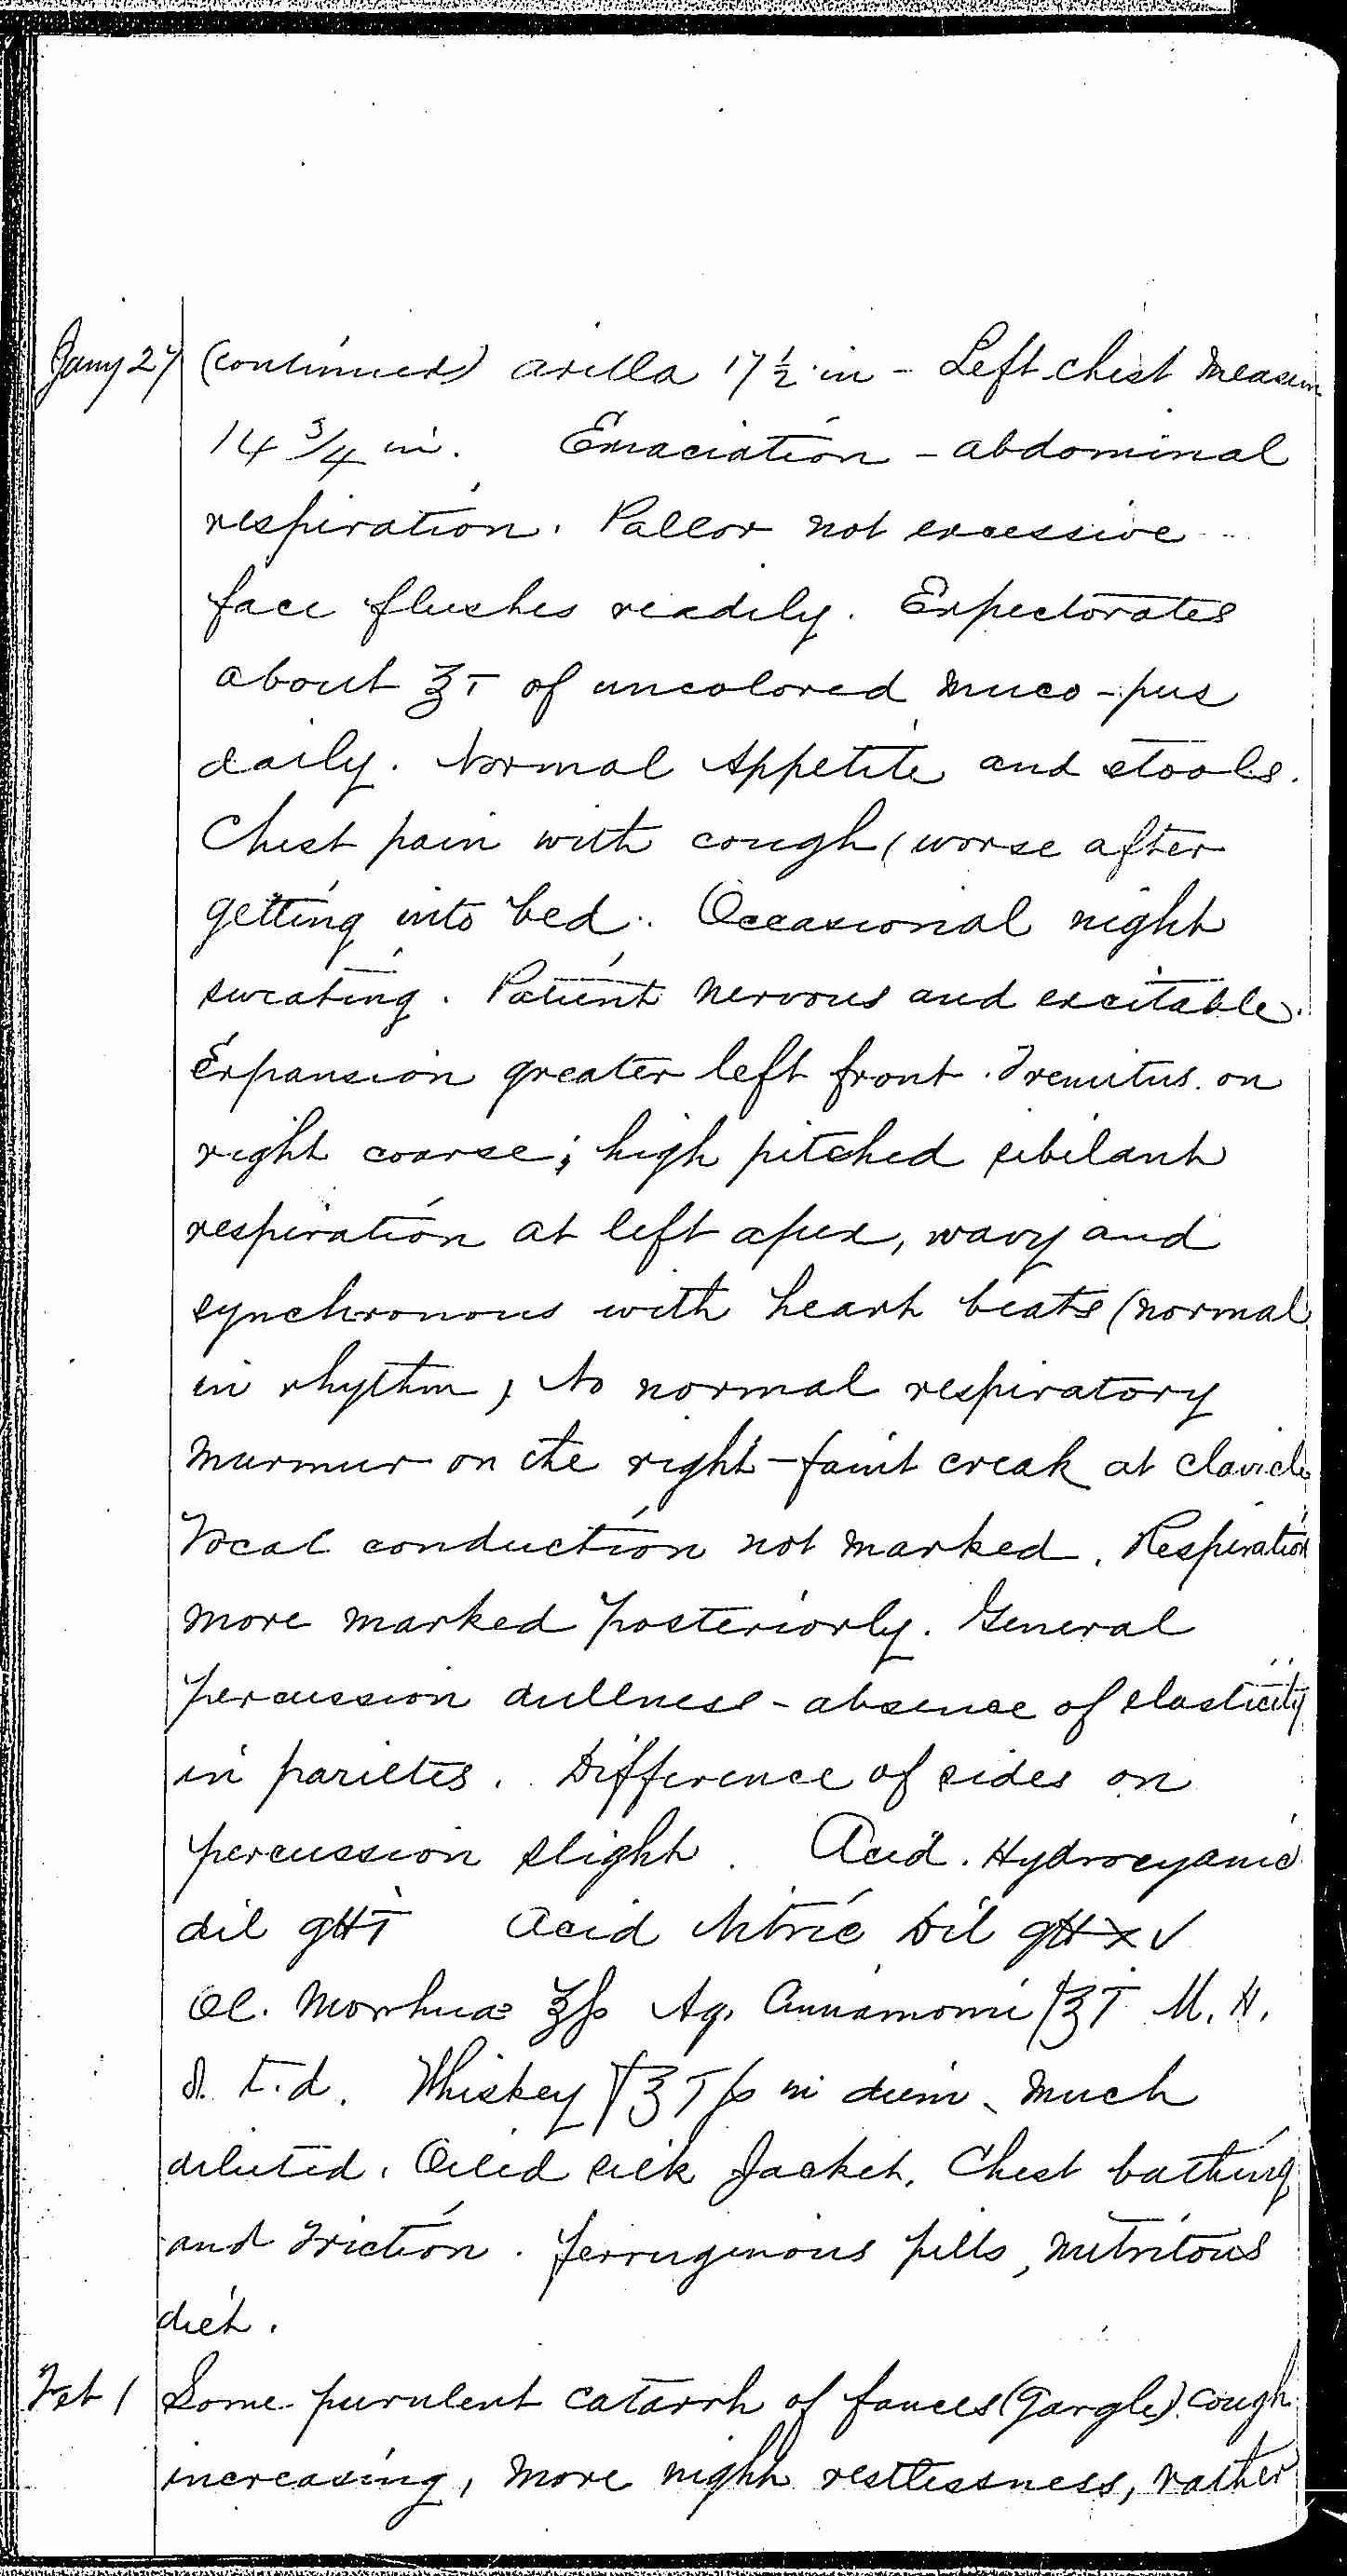 Entry for William Bathwell (page 6 of 13) in the log Hospital Tickets and Case Papers - Naval Hospital - Washington, D.C. - 1868-69